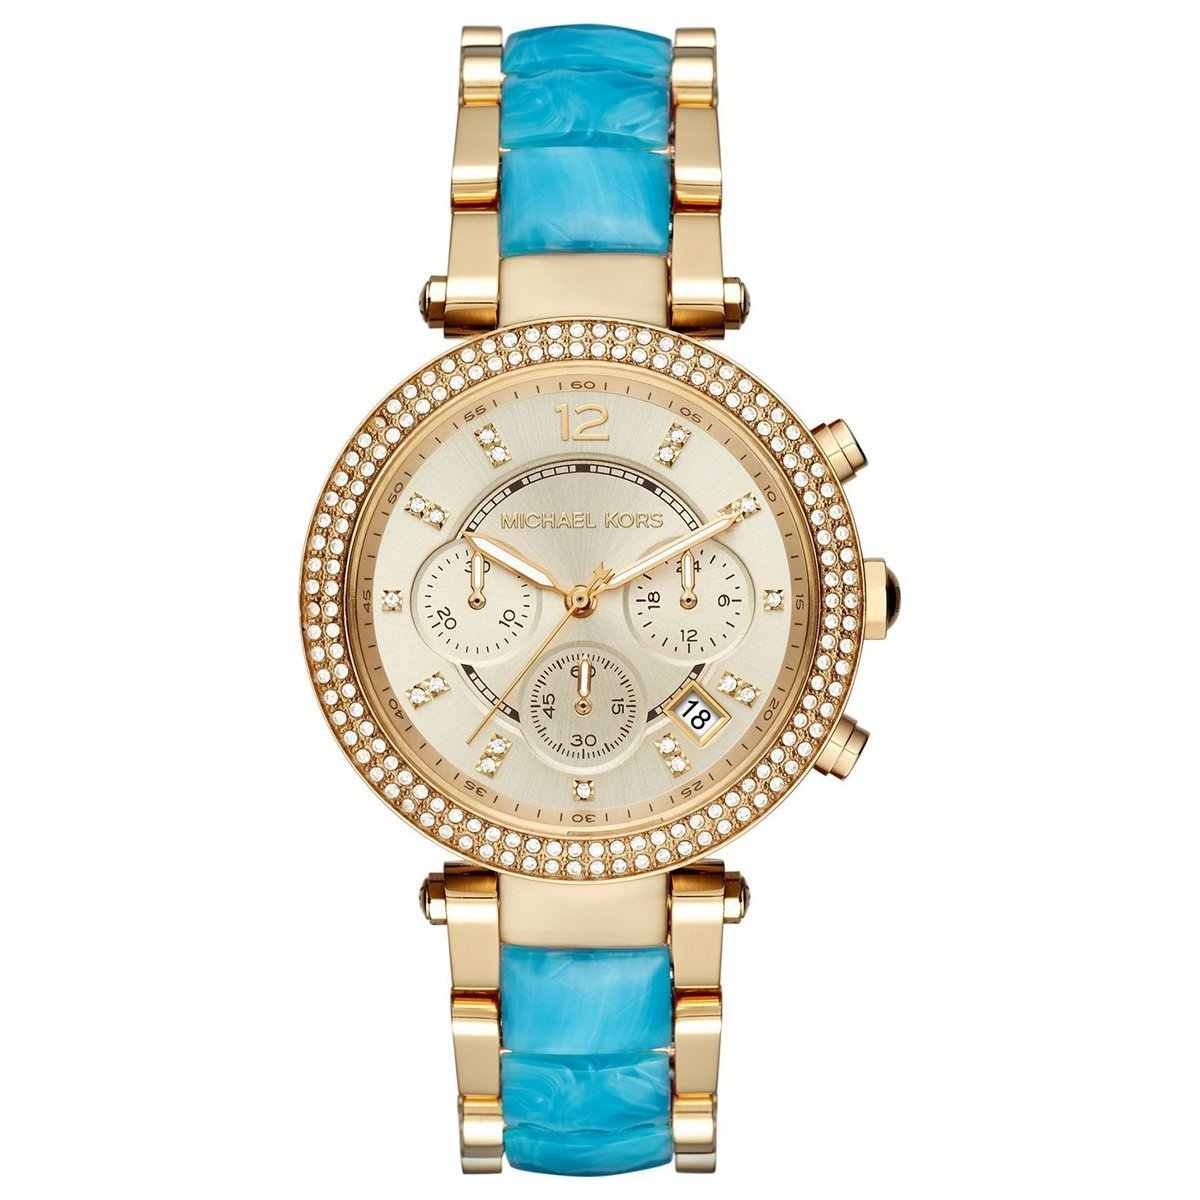 Michael Kors Ladies Watch Chronograph Parker Blue MK6364 - Watches & Crystals